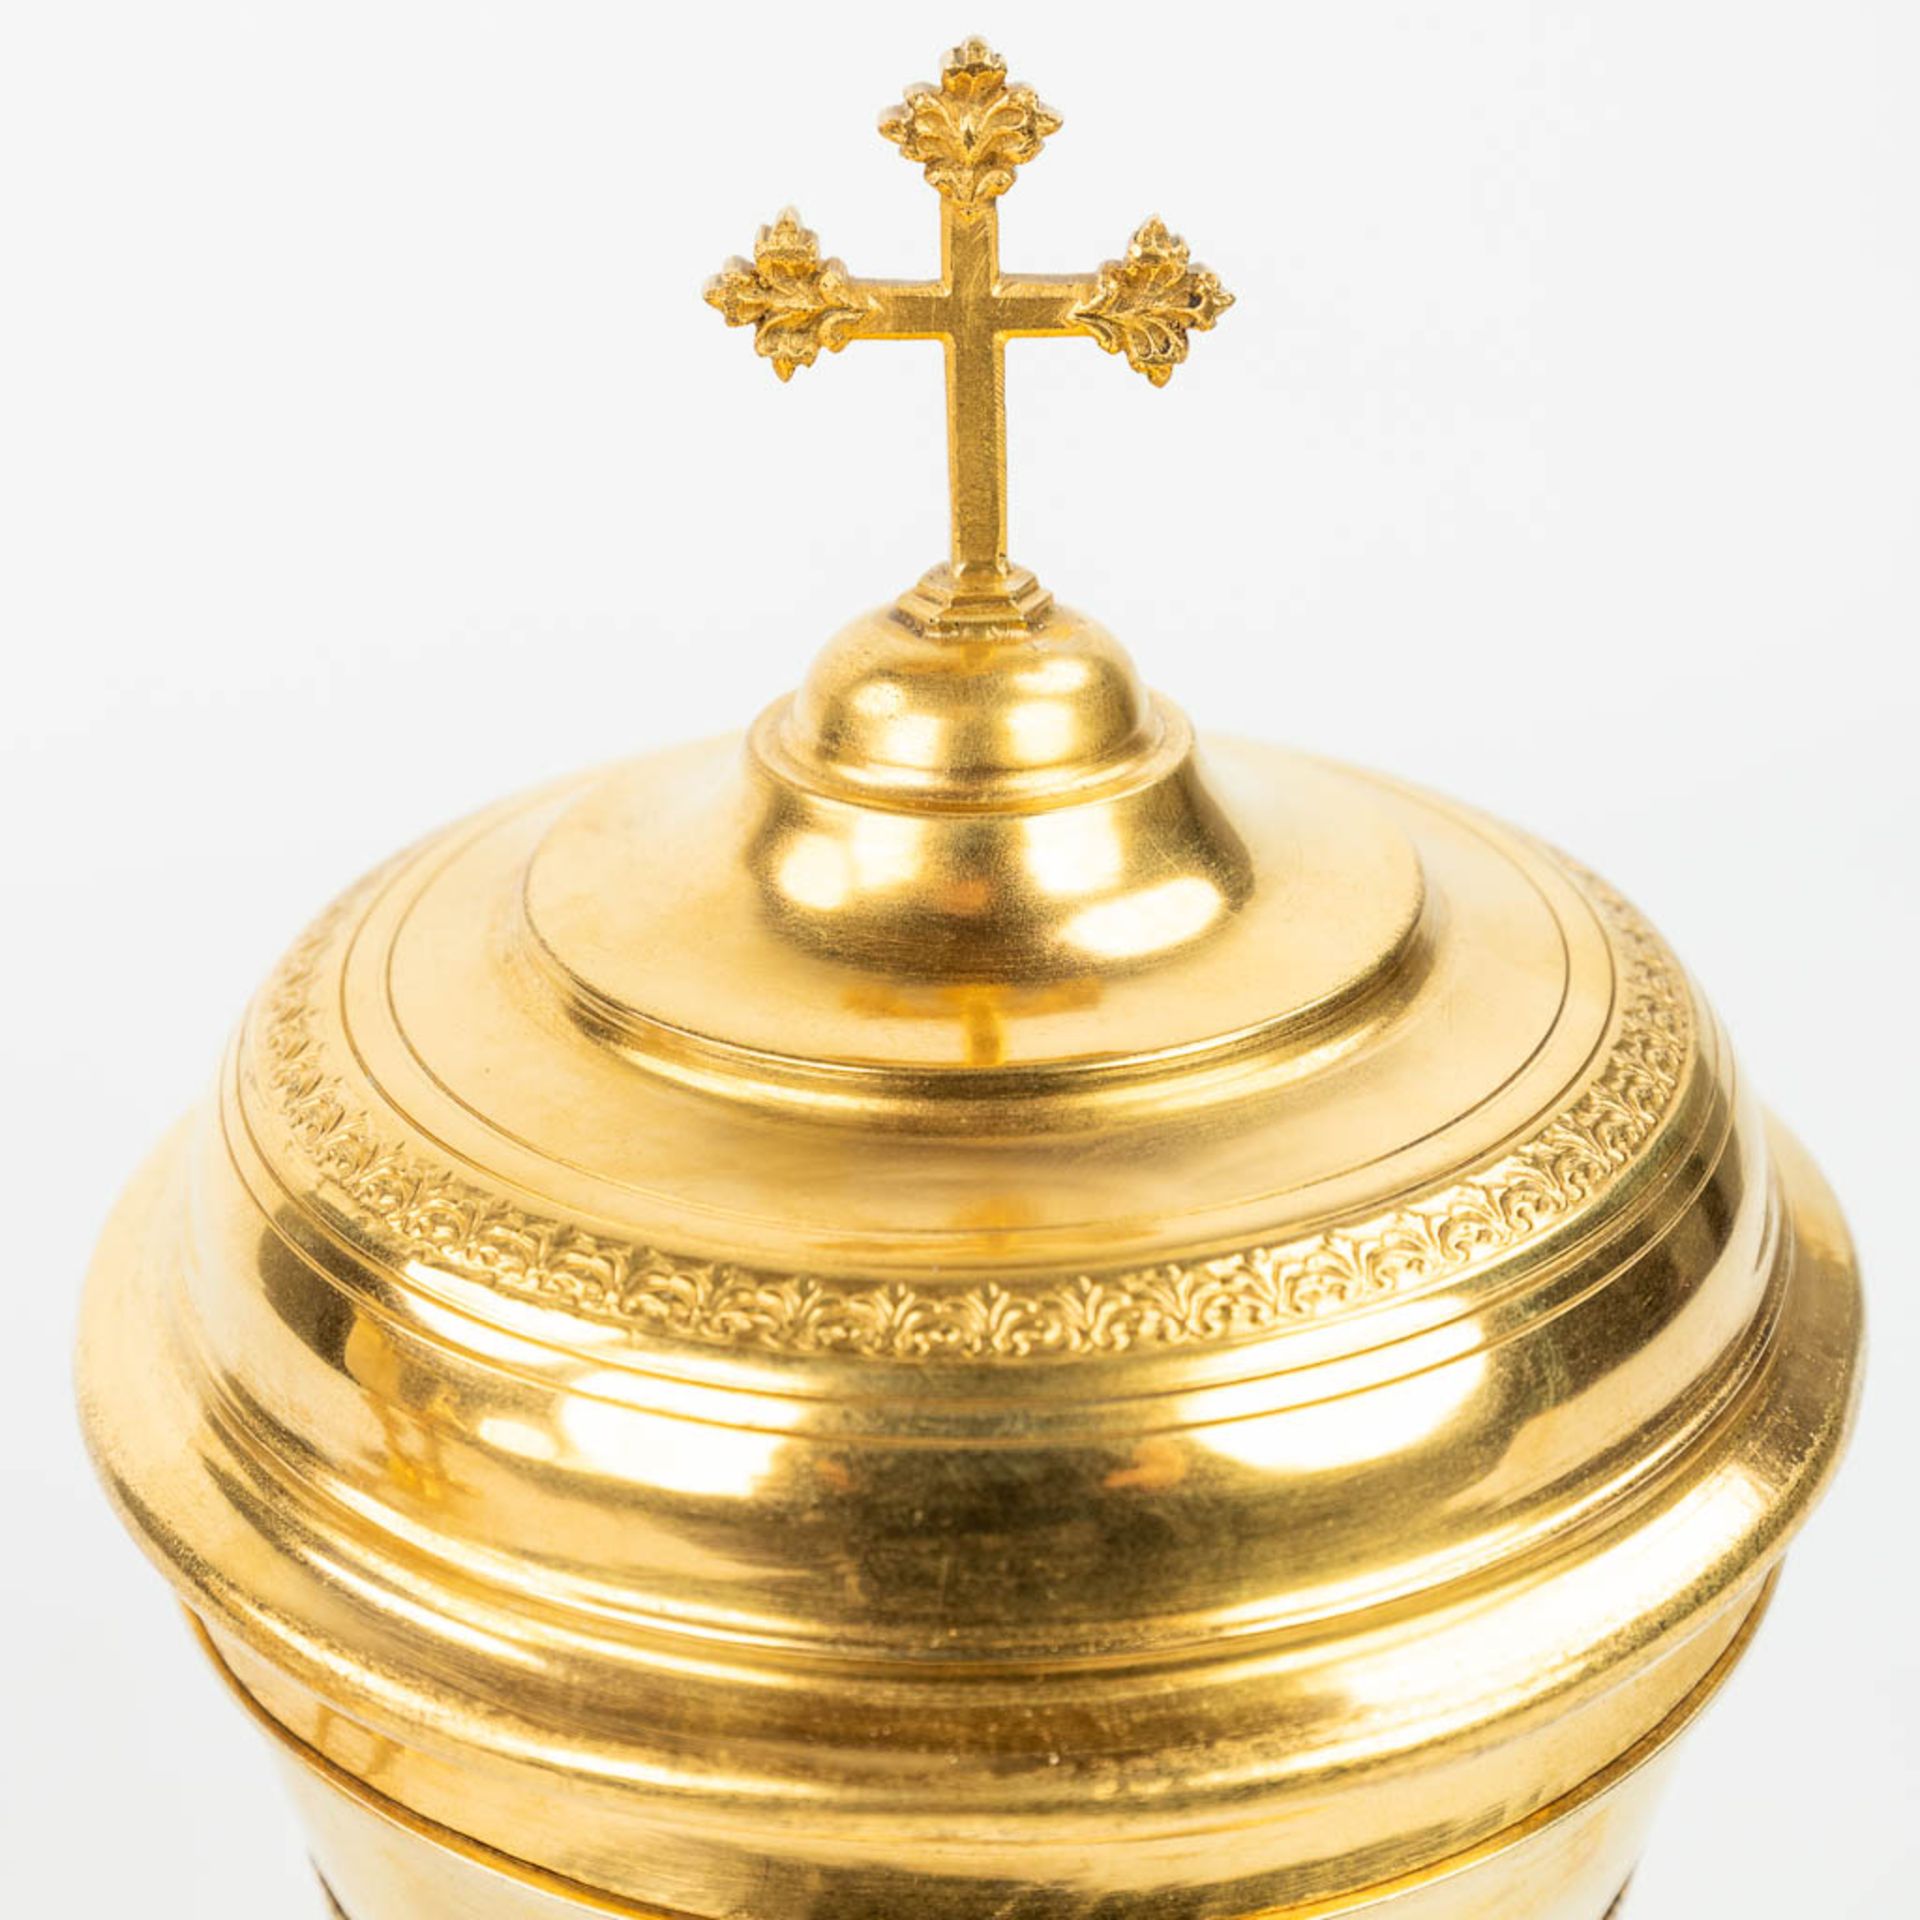 A collection of 4 large ciboria and a chalice made of silver and gold plated metal. - Image 7 of 24